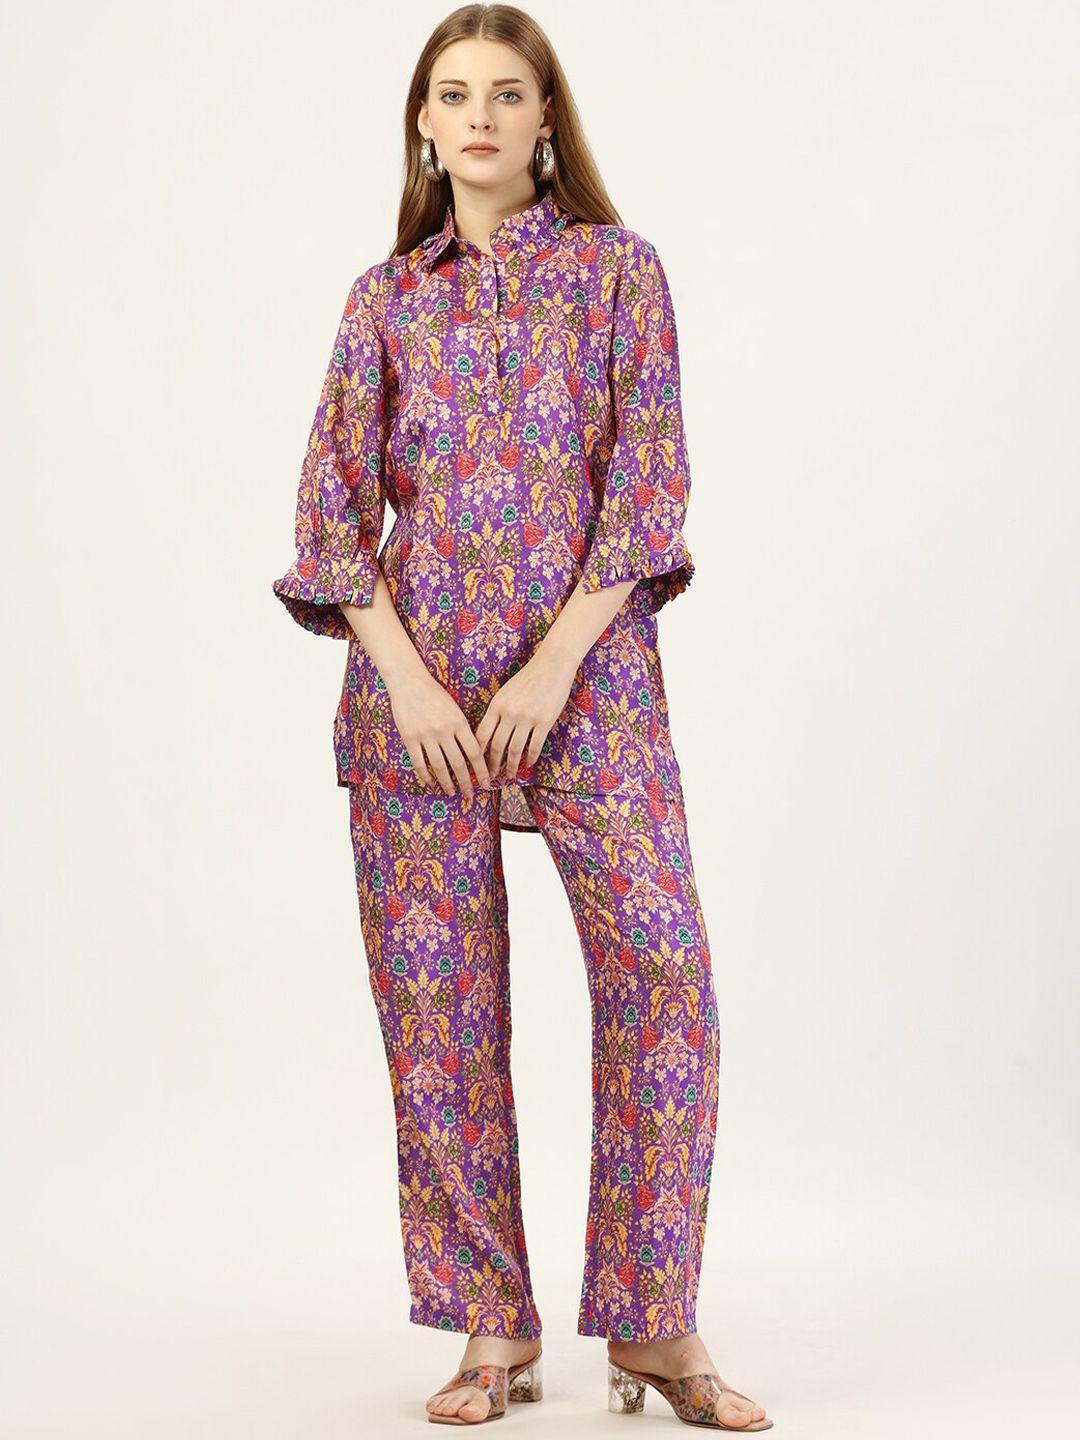 sew you soon floral printed shirt with trousers co-ords